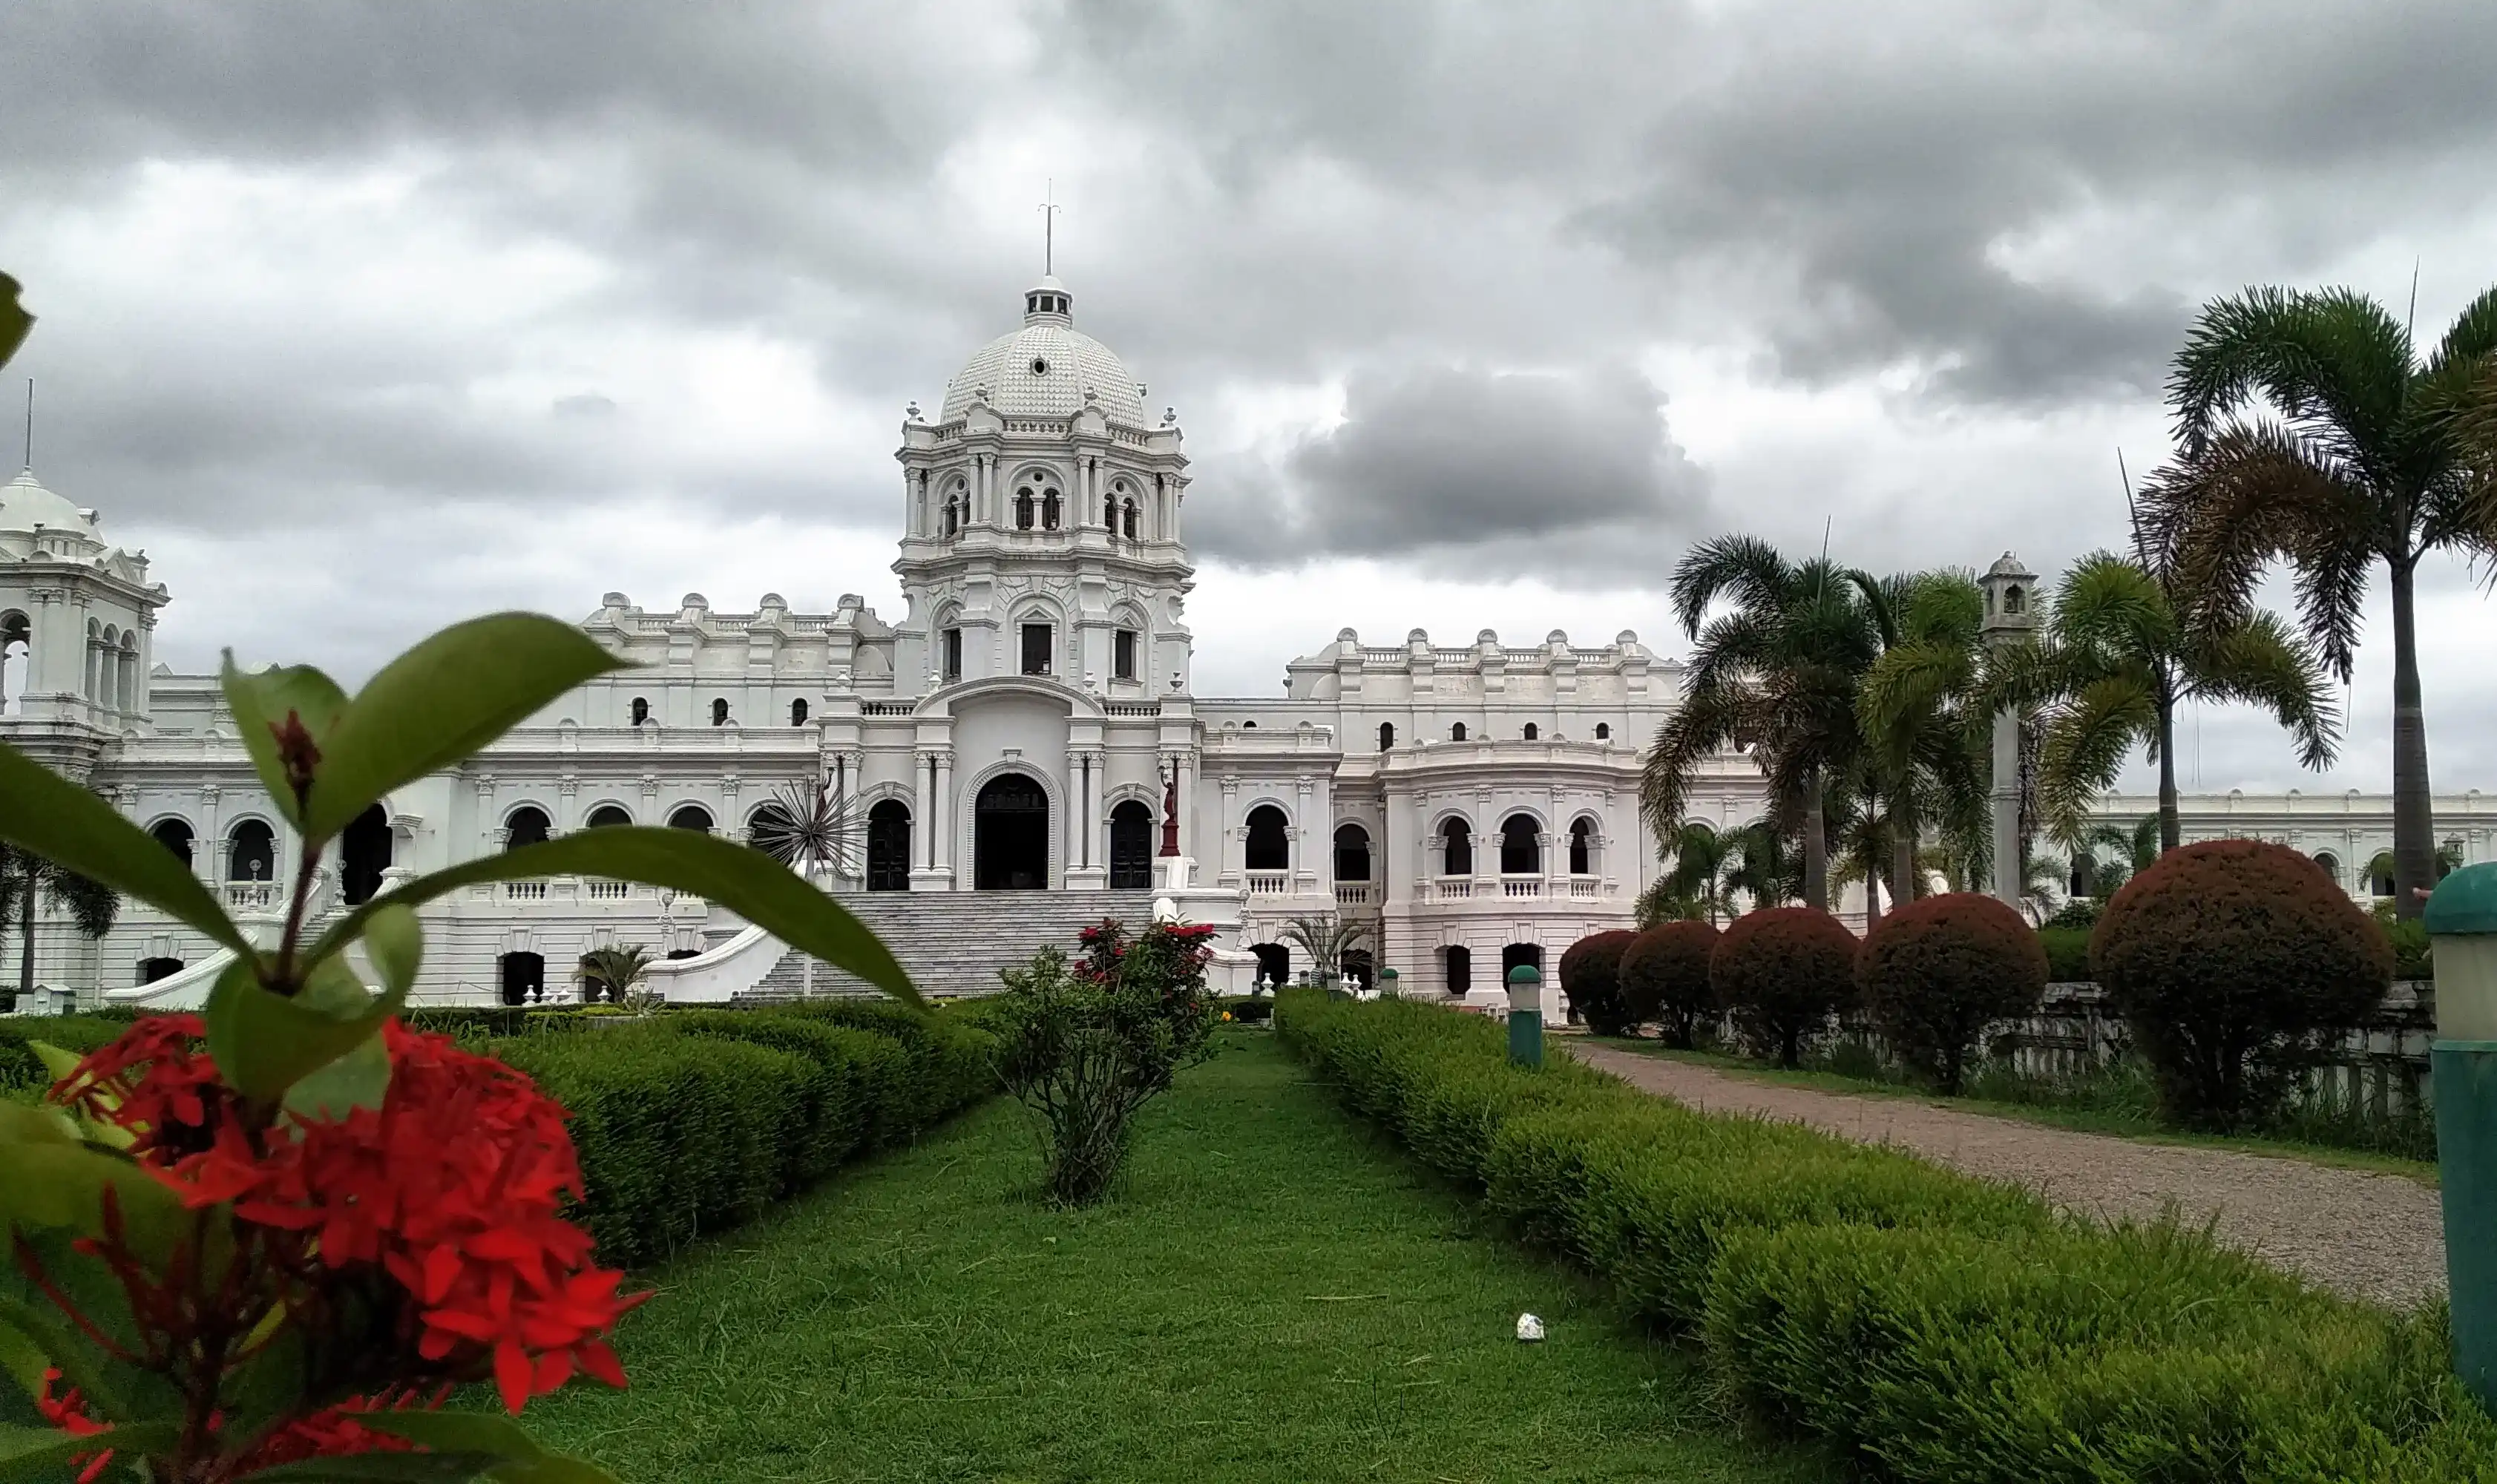 The Ujjayanta Palace of the Kingdom of Tripura situated in Agartala that was constructed between 1899 and 1901 by the King of Tripura, Maharaja Radha Kishore Manikya Debbarma under Martin and Burn Co.